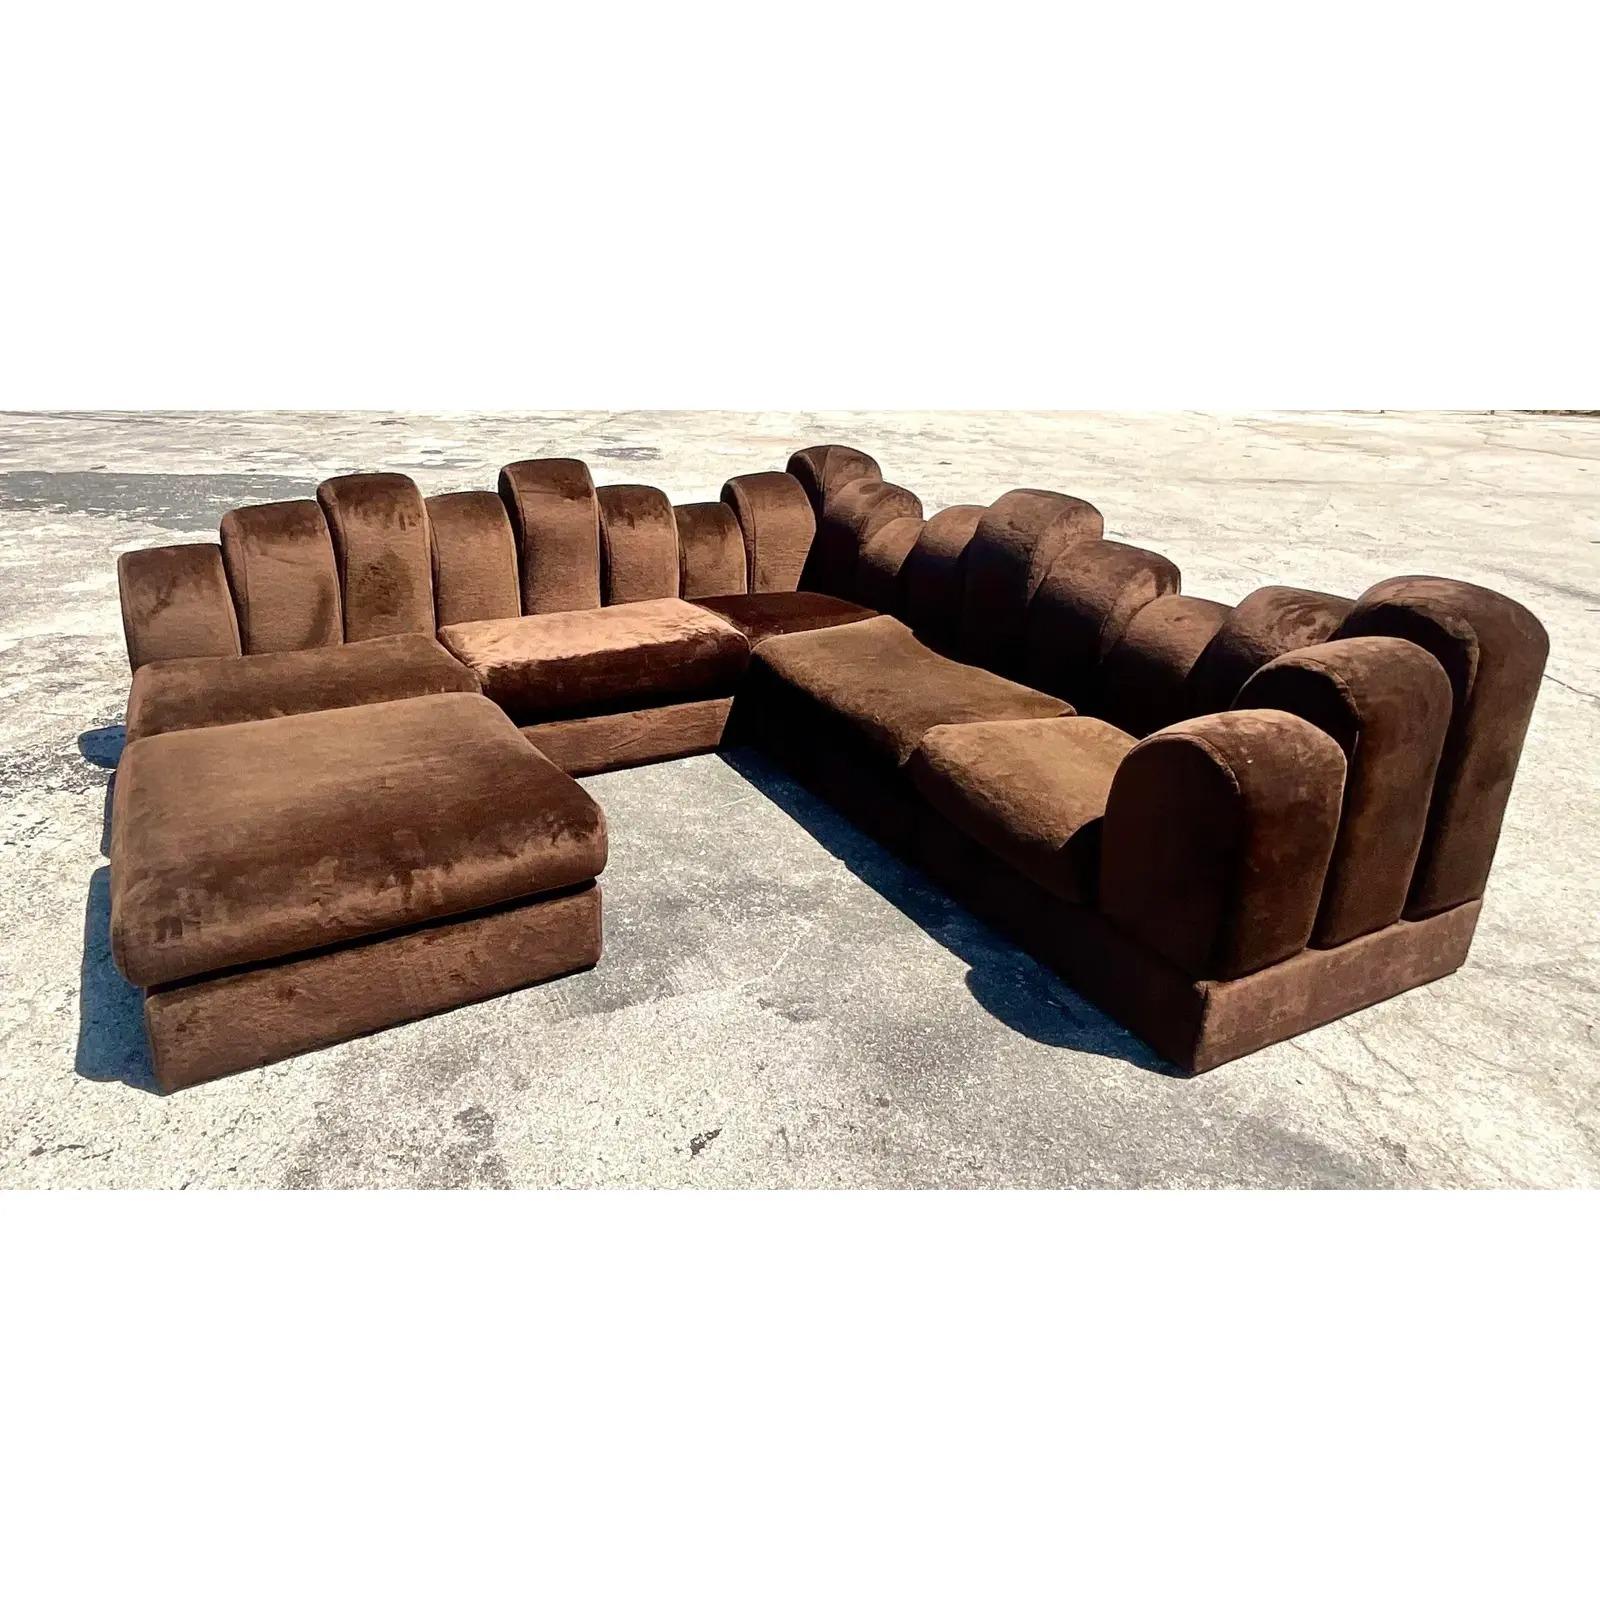 Incredible vintage 70s sectional sofa. Made by the iconic Comfort Designs groups. Beautiful chocolate brown velvet in the legendary Skyscraper design. Acquired from a New Orleans estate. While the fabric is in great shape, I would recommend a nice